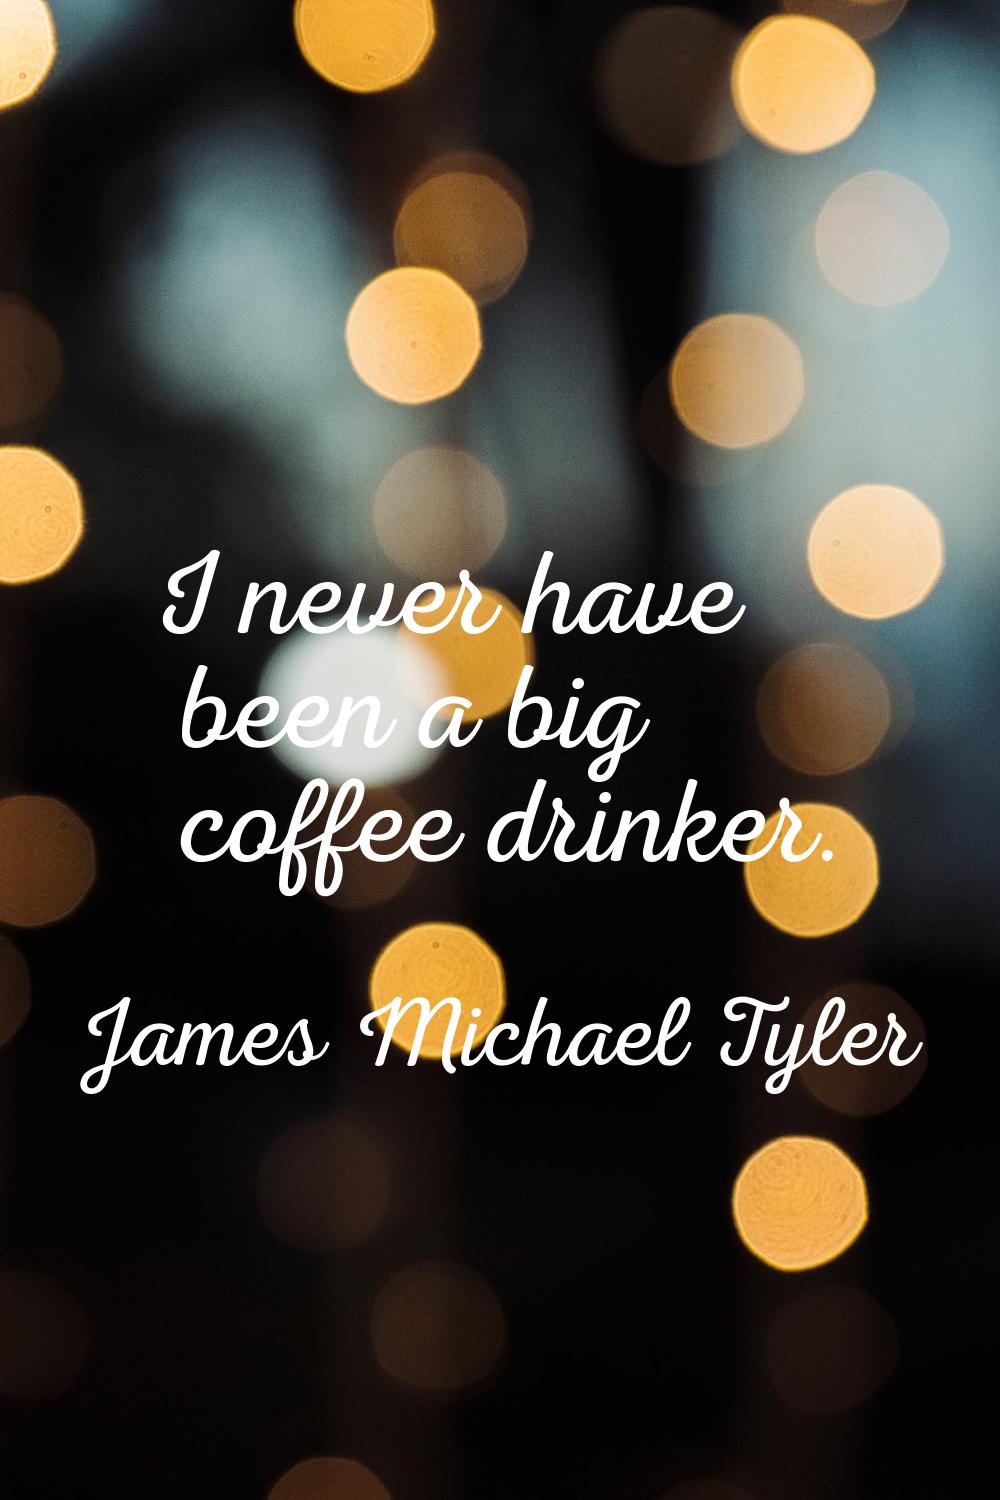 I never have been a big coffee drinker.